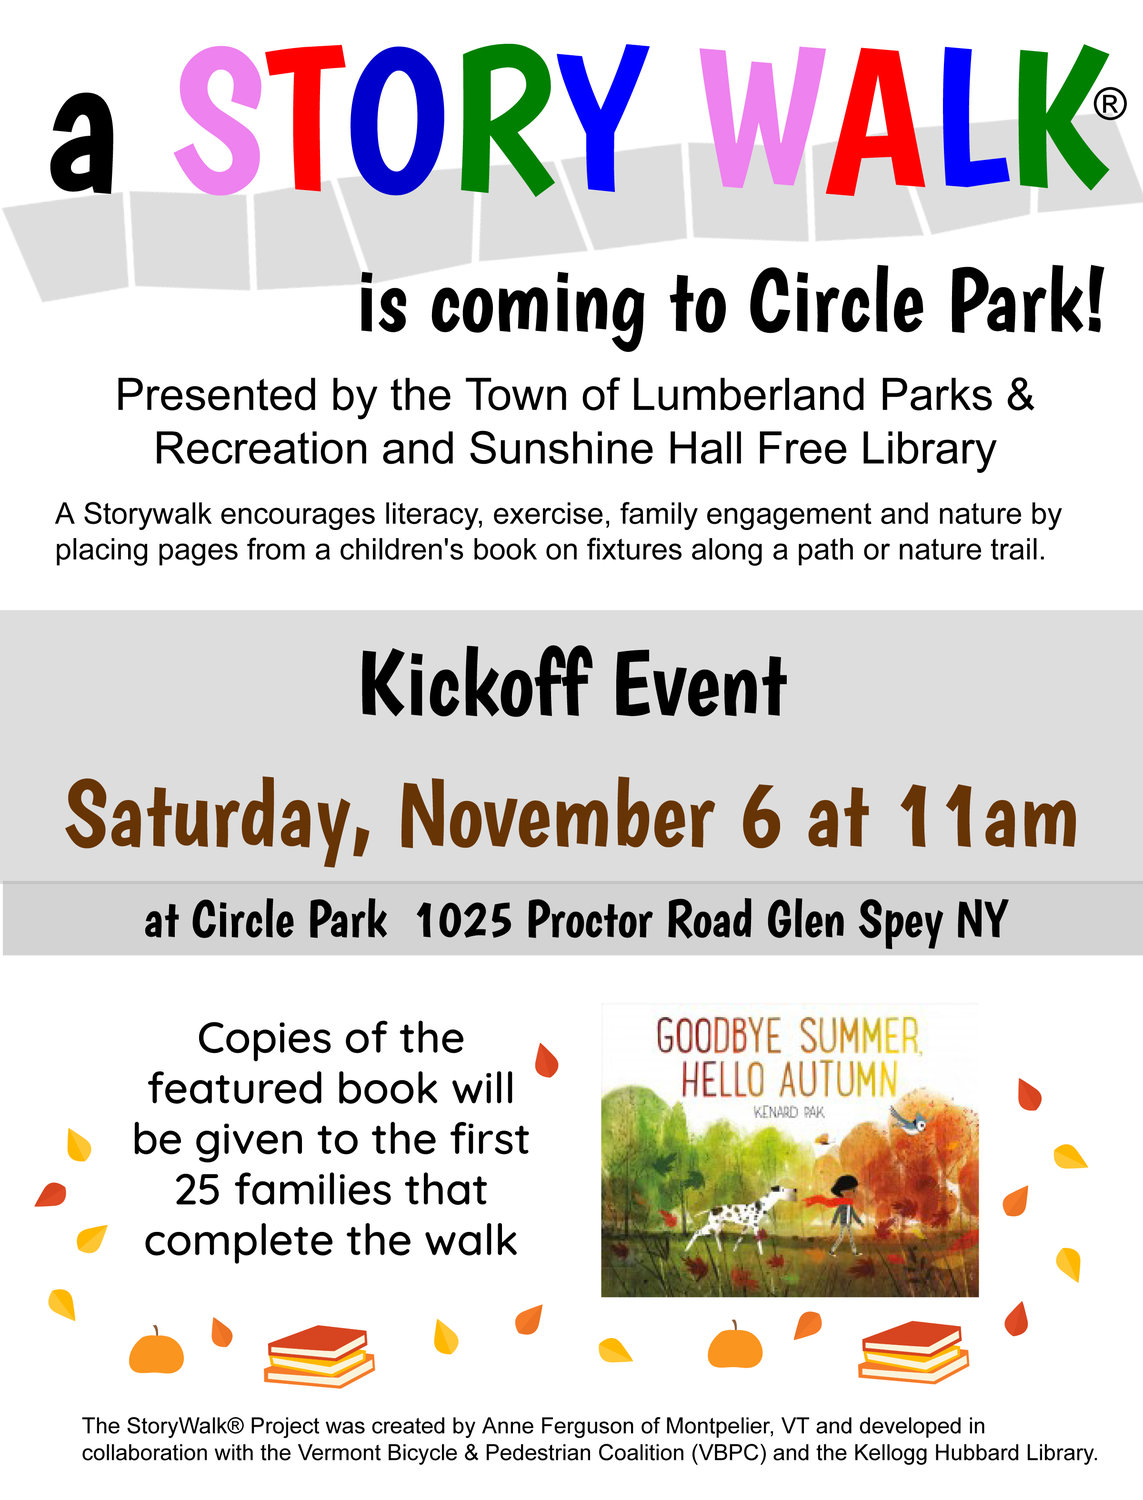 An exciting new program- Story Time is coming to Circle Park in Lumberland. Sponsored by the Lumberland Parks and Recreation Department and the Sunshine Hall Free Library, Story Time combines a good children’s book with some fun outside activities and a walk in the woods. The kick off for Story Time is Saturday, November 6th starting at 11 a.m. The feature book is “Goodbye Summer, Hello Autumn” by the award winning writer and artist Kenard Pak.